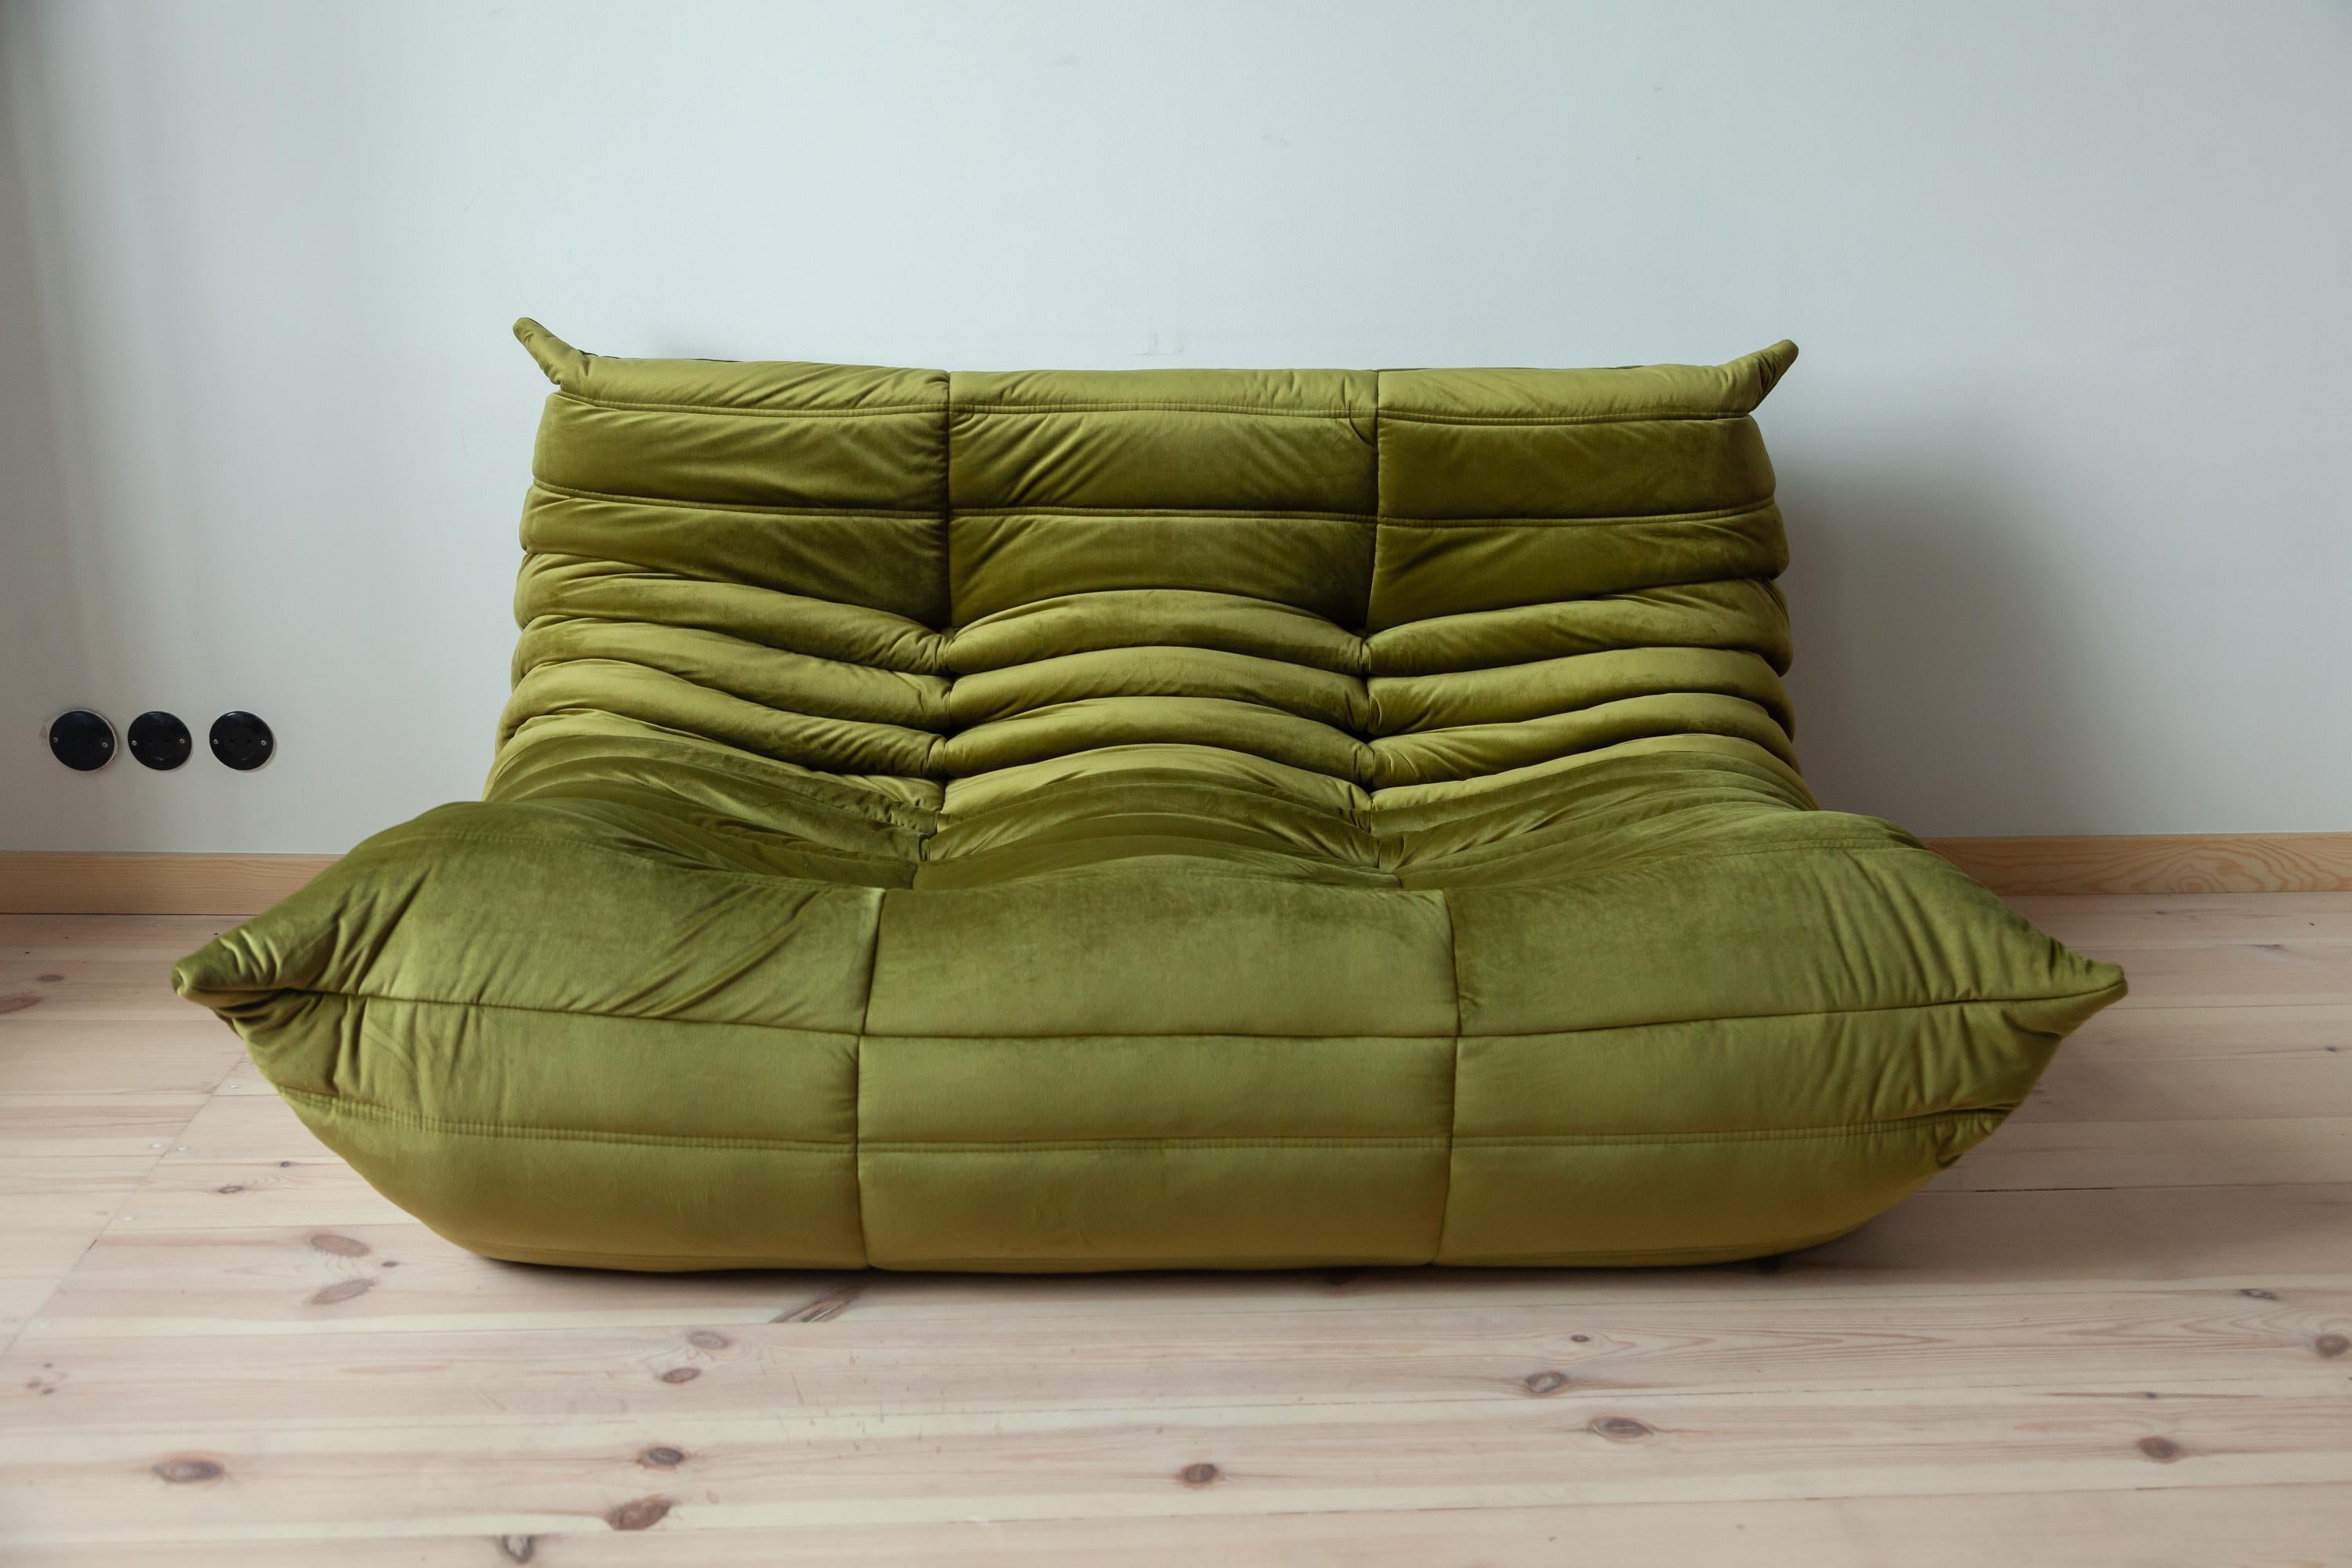 This two-seat Togo couch was designed by Michel Ducaroy in 1973 and was manufactured by Ligne Roset in France. It has been reupholstered in new olive green velvet (131 x 102 x 70 cm). It has the original Ligne Roset logo and genuine Ligne Roset